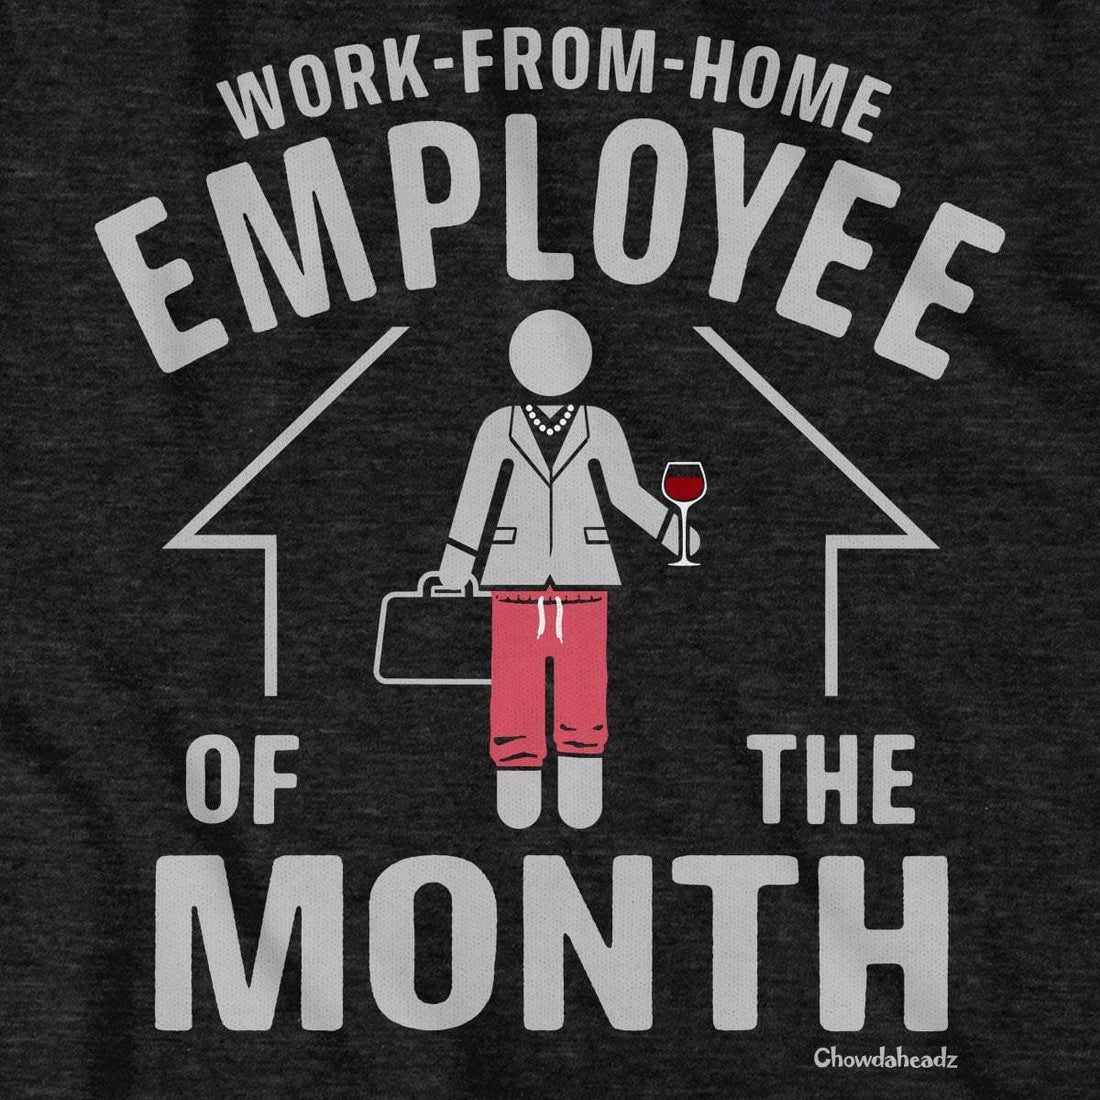 Work-From-Home Employee of the Month T-Shirt - Chowdaheadz